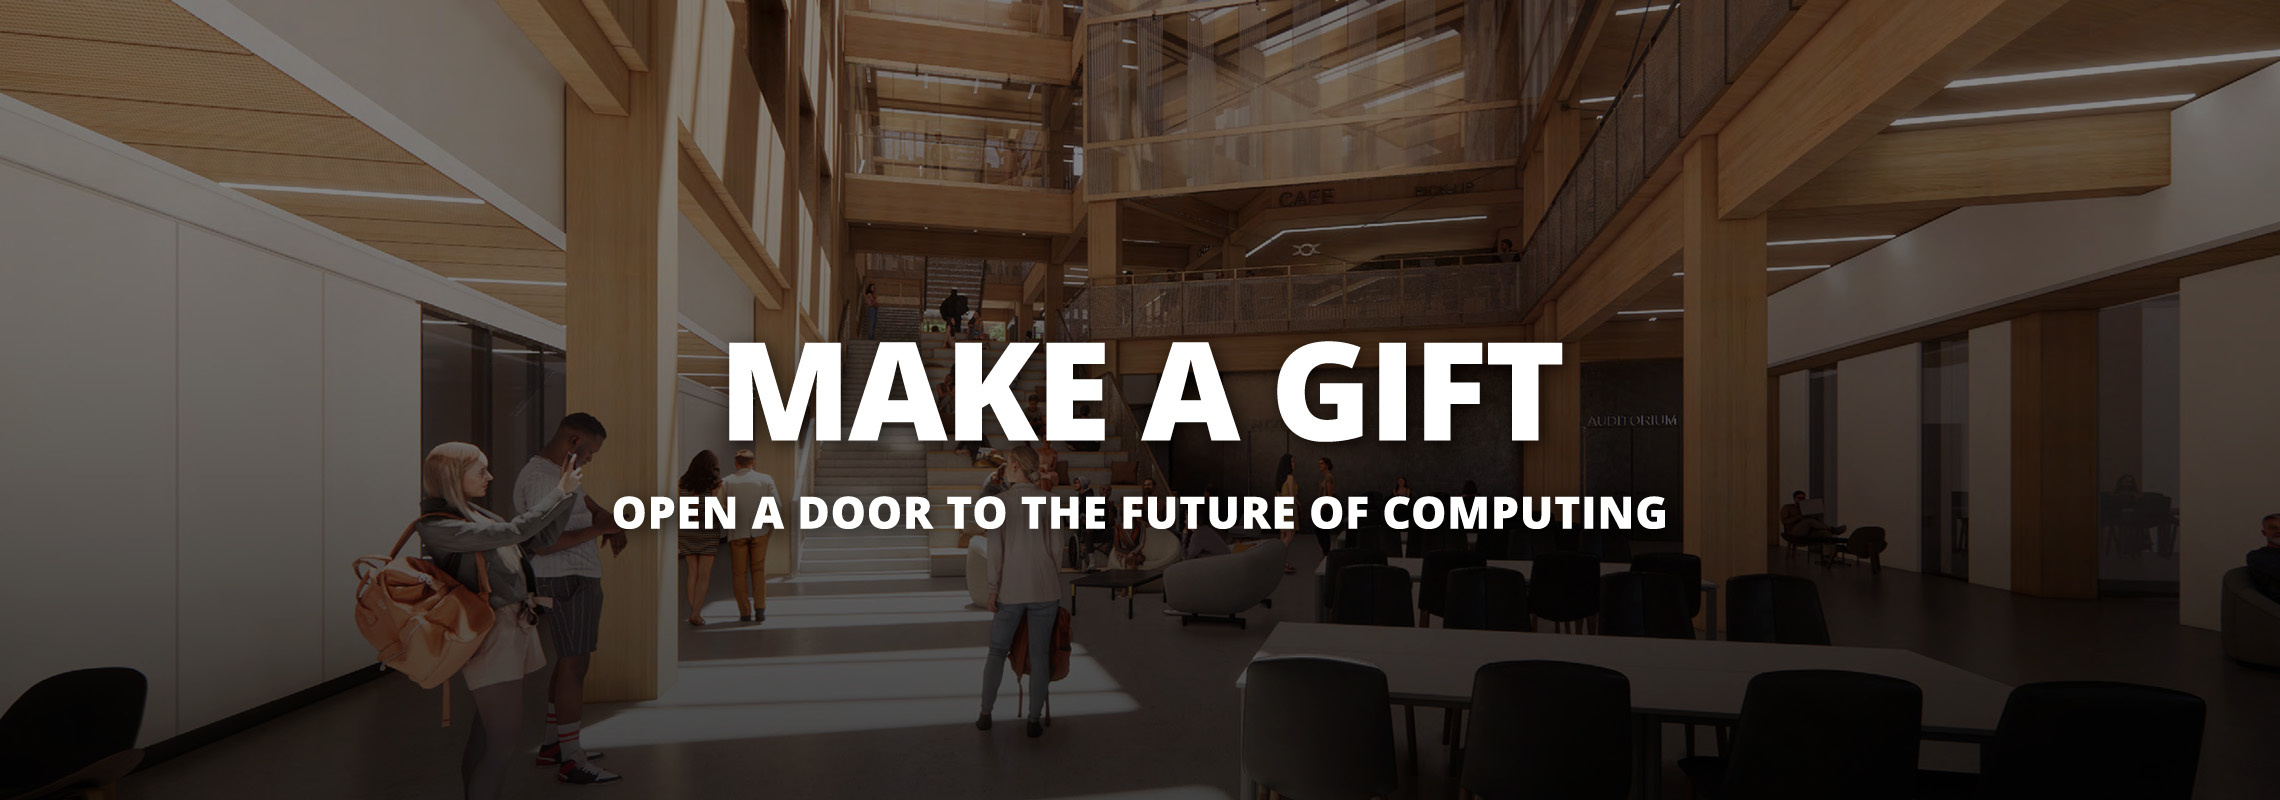 Make a Gift - Open a Door to the Future of Computing